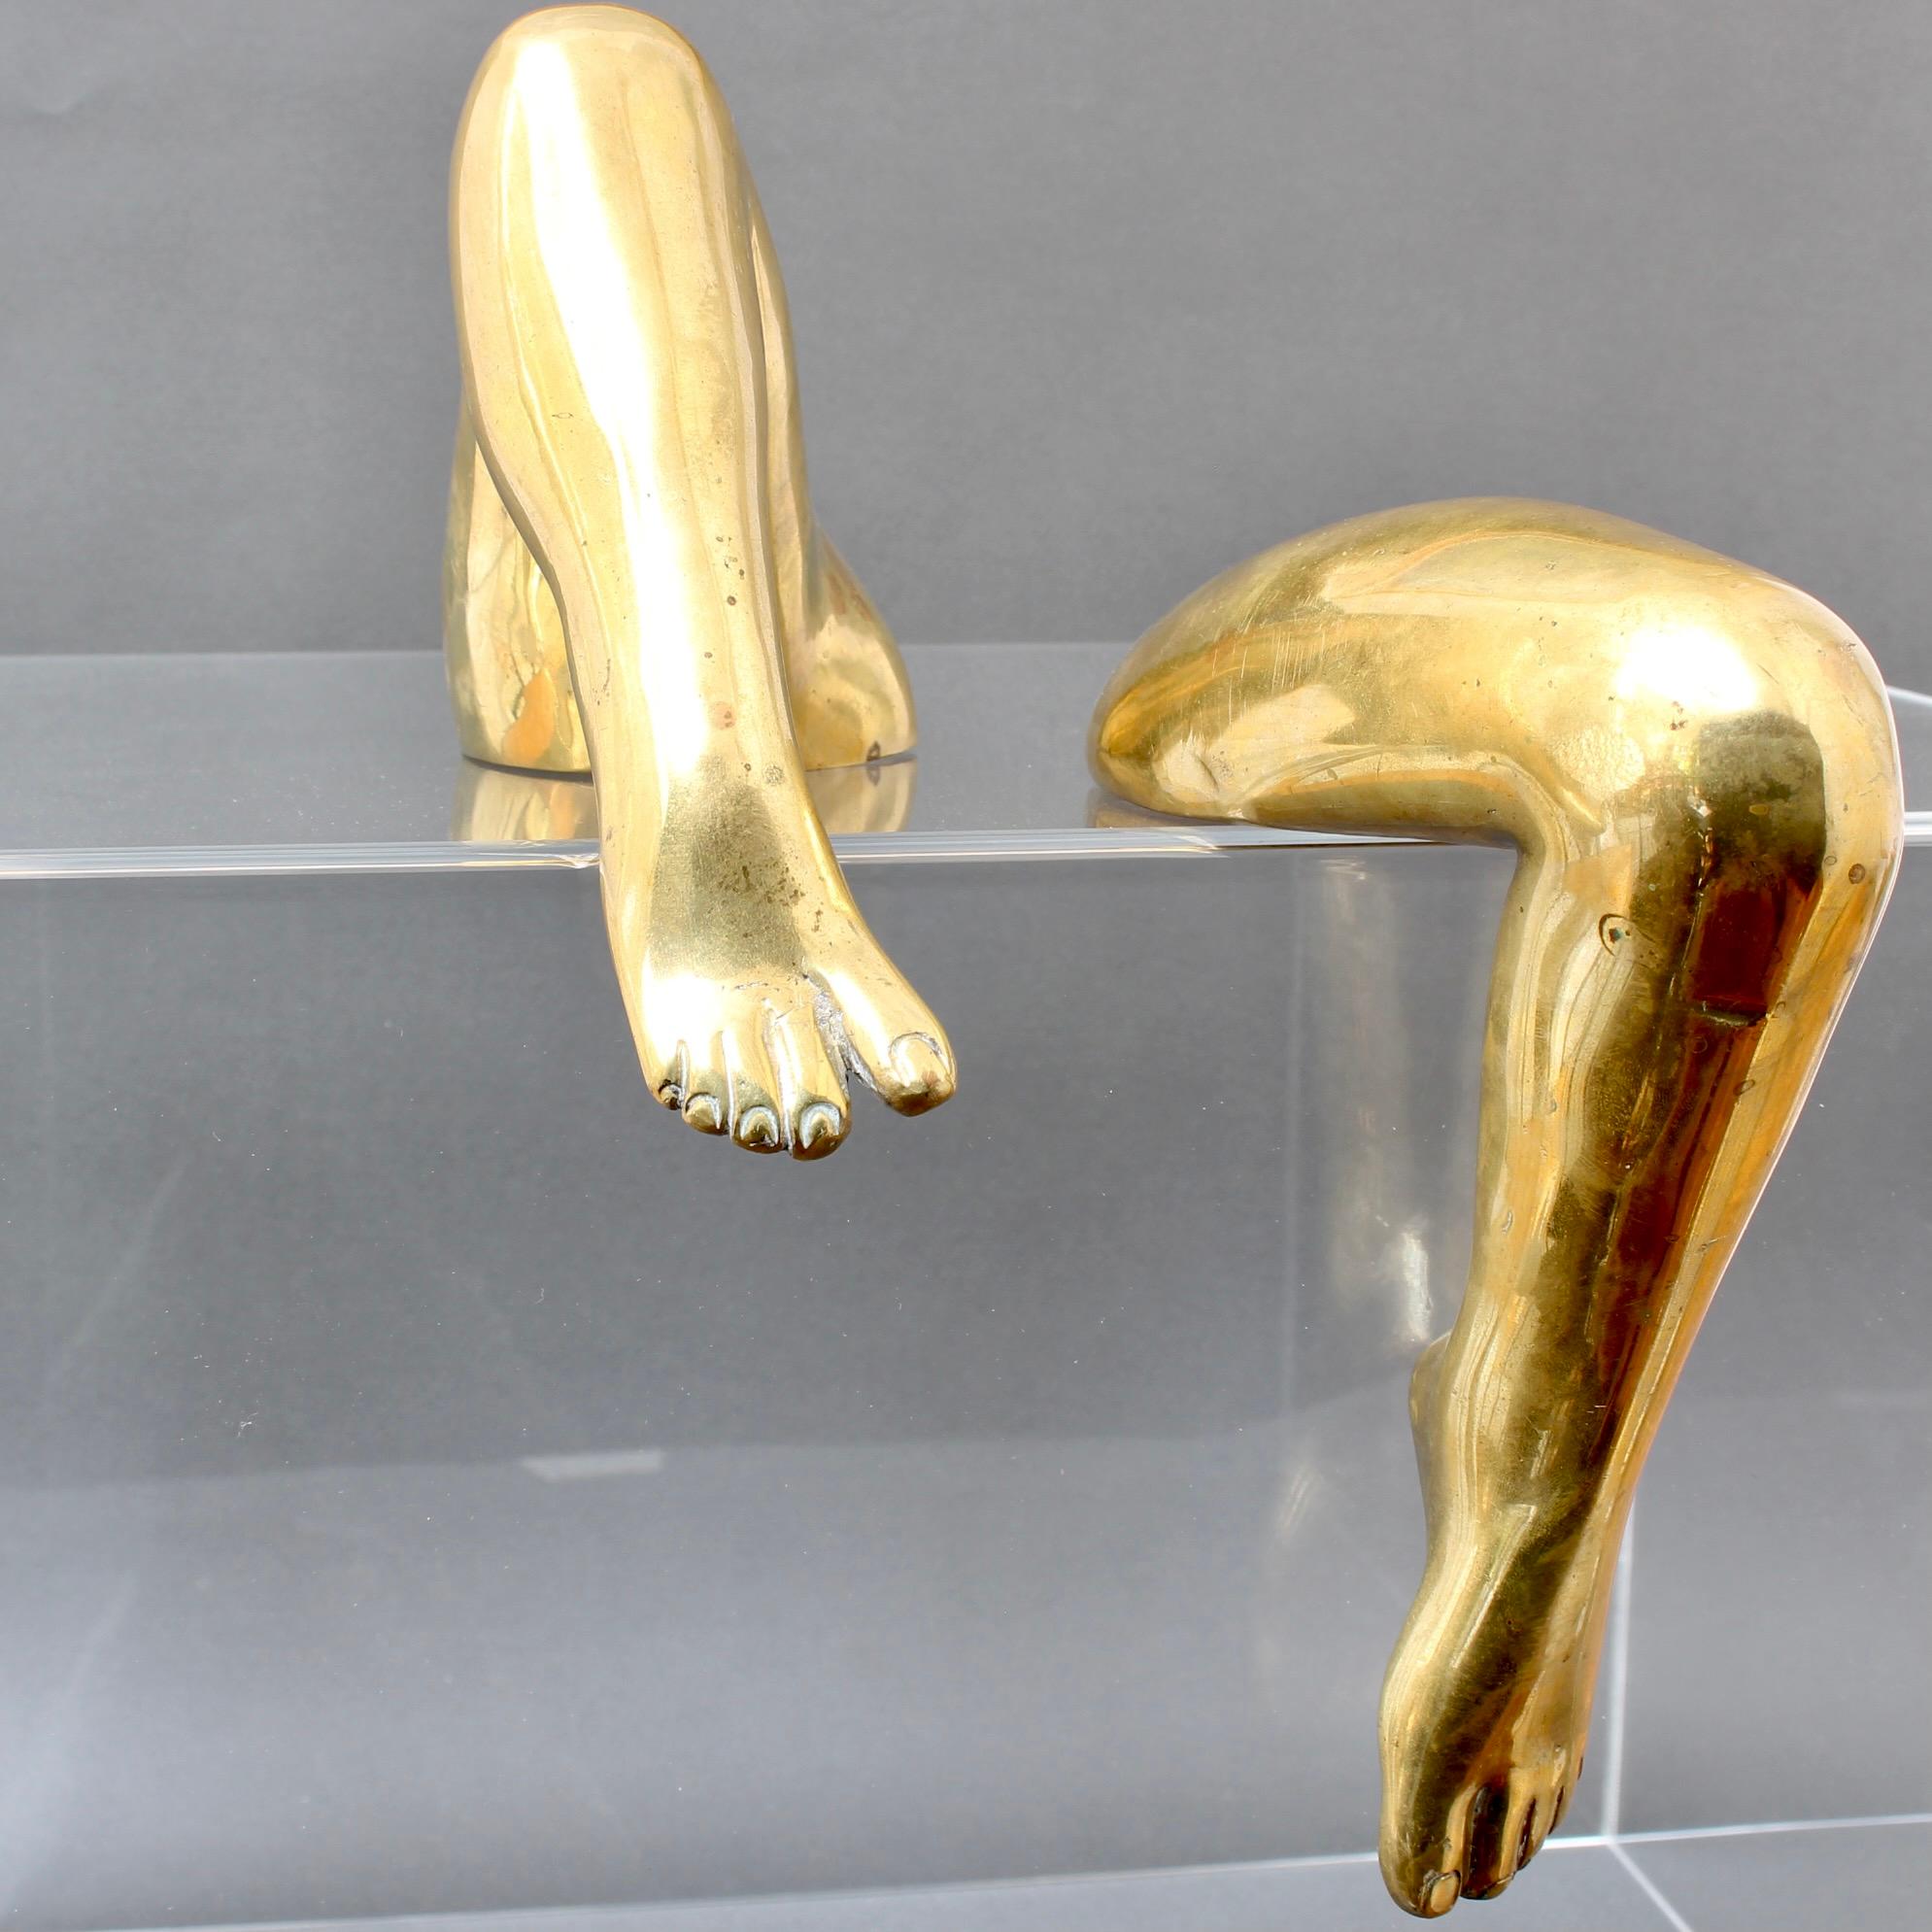 Gilt bronze legs by award winning artist Pietrina Checcacci (circa 1970s). Although her art comes in many forms, these distinctive pieces come from a period in the 1970s and 80s in which body parts in close-up: hands, fingers, legs, feet and noses